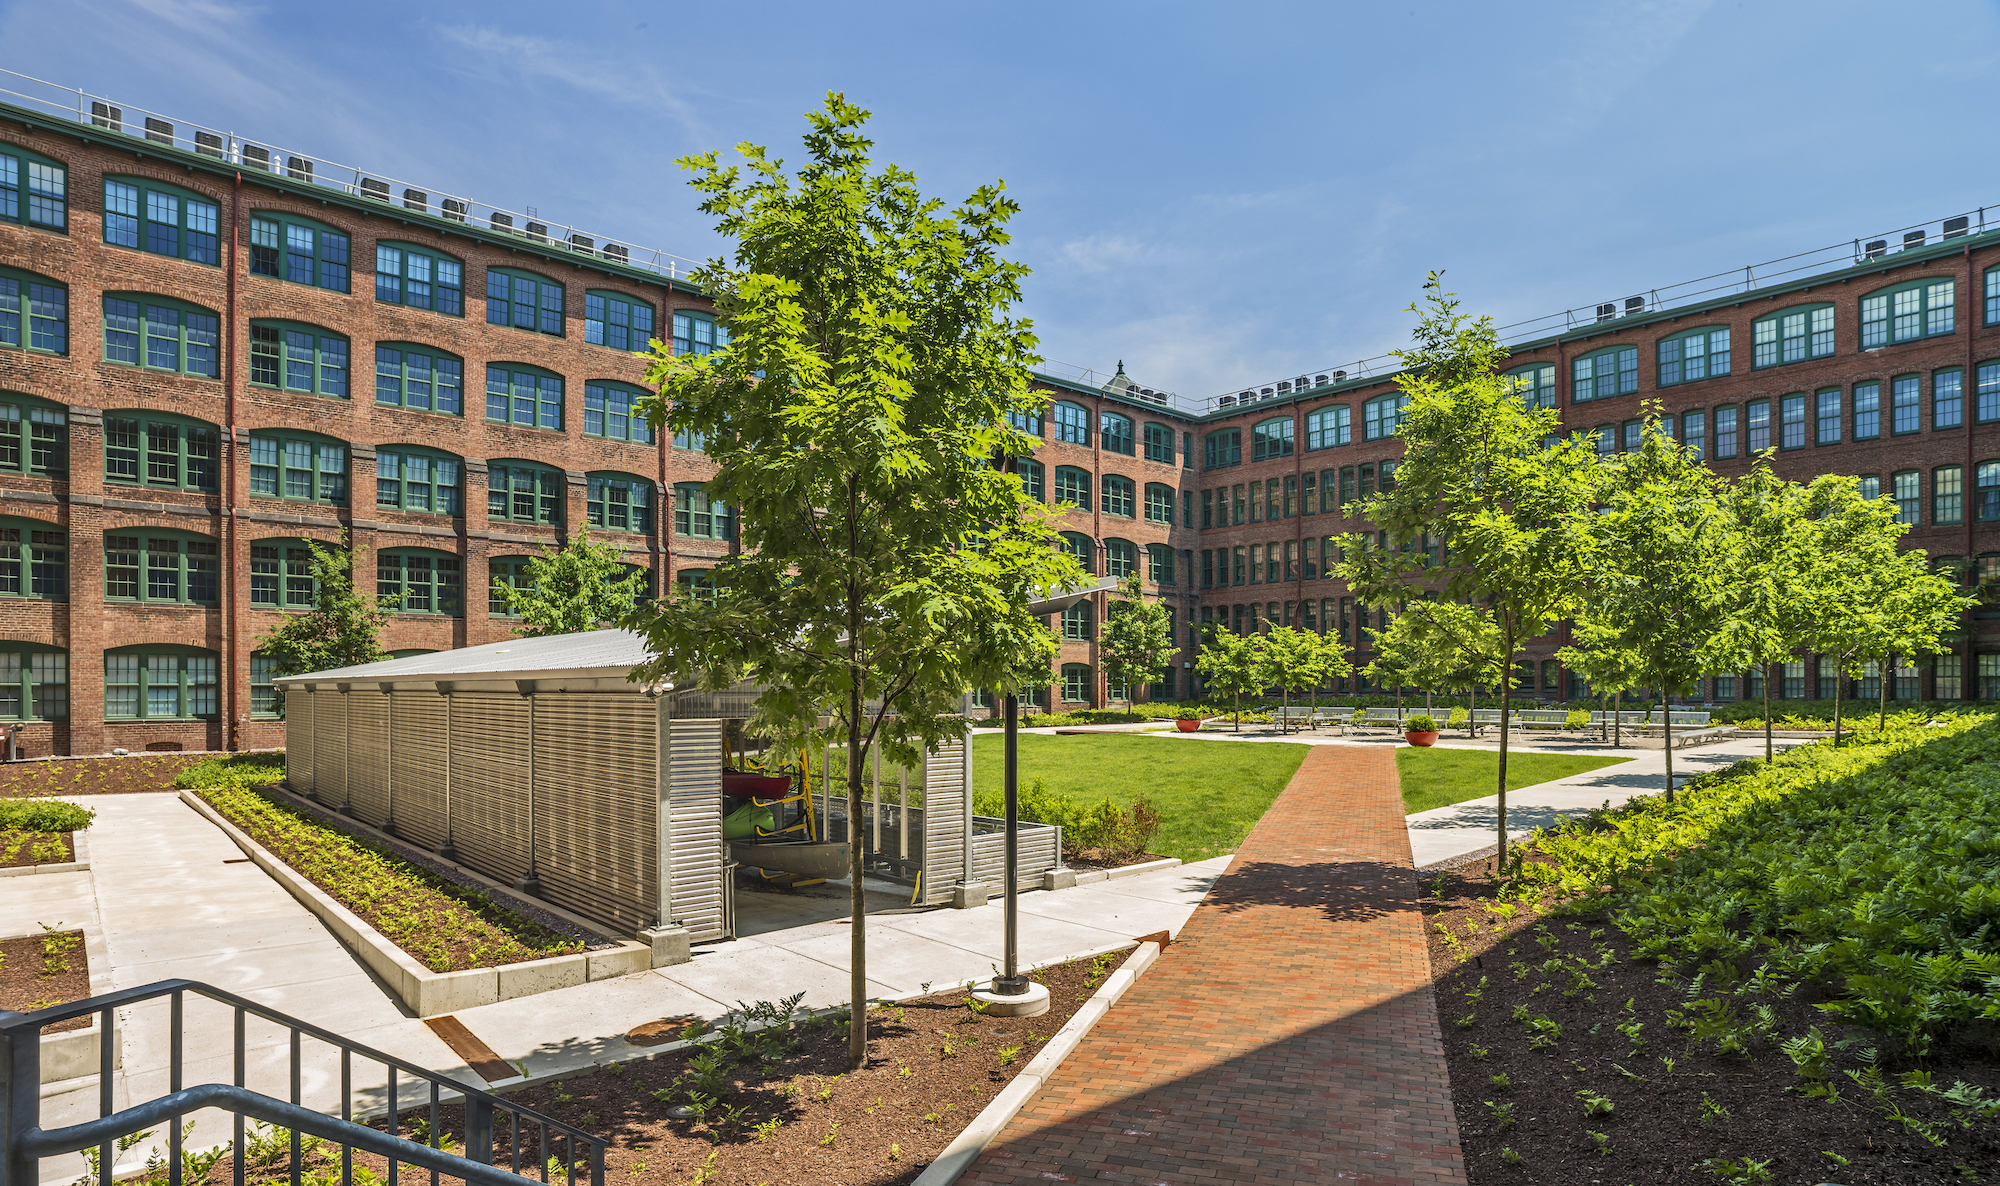 The Waltham Watch Factory courtyard after renovation. Photo © Richard Mandelkorn Photography